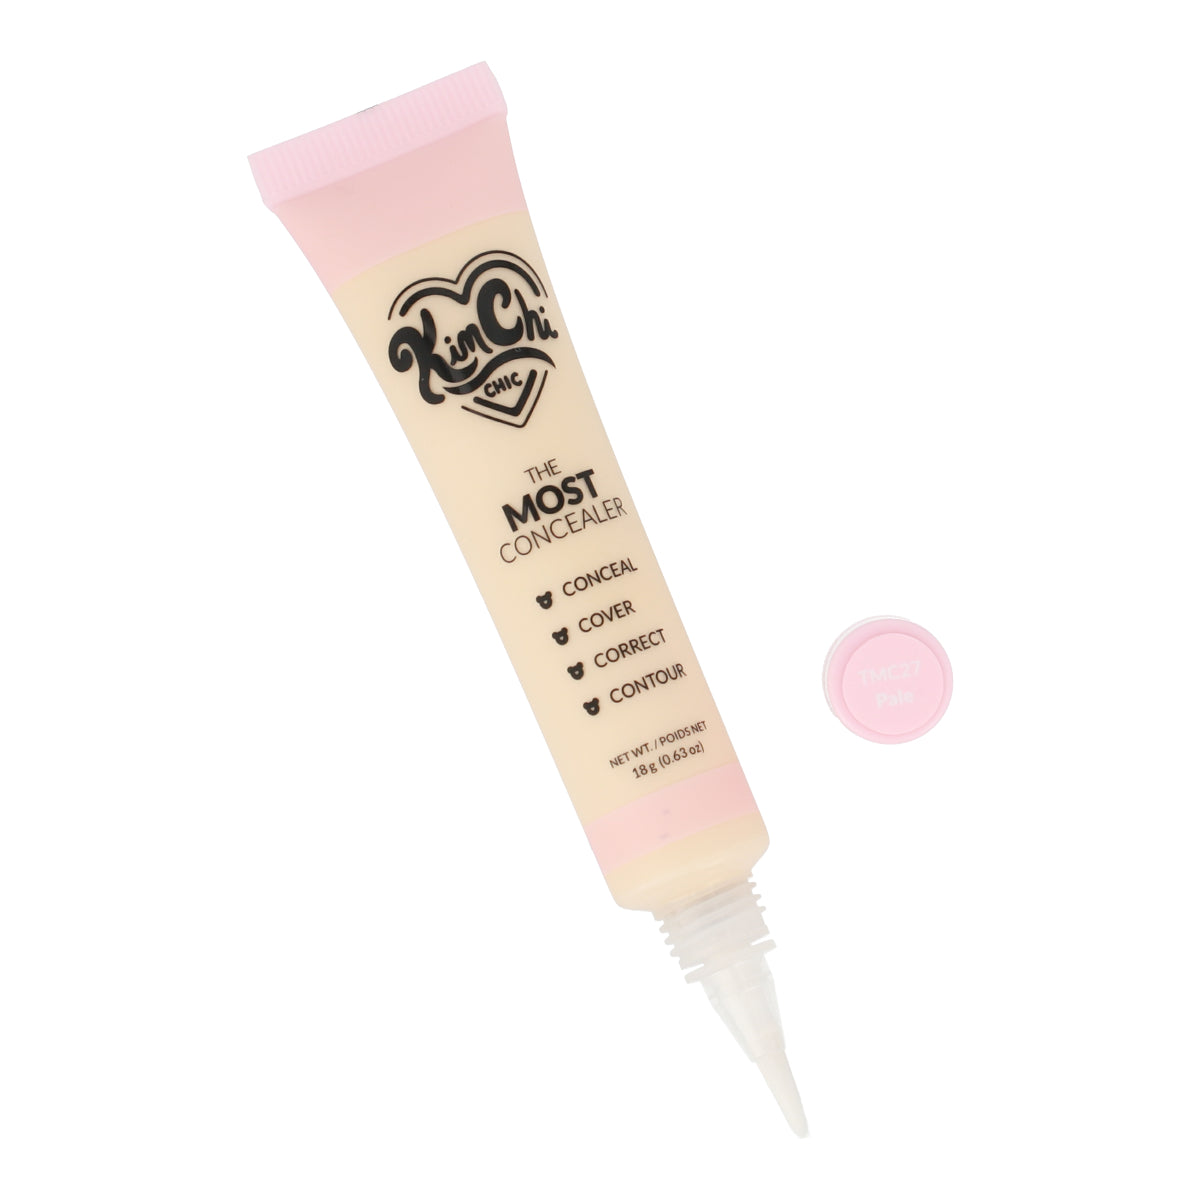 The Most Concealer 27 Pale